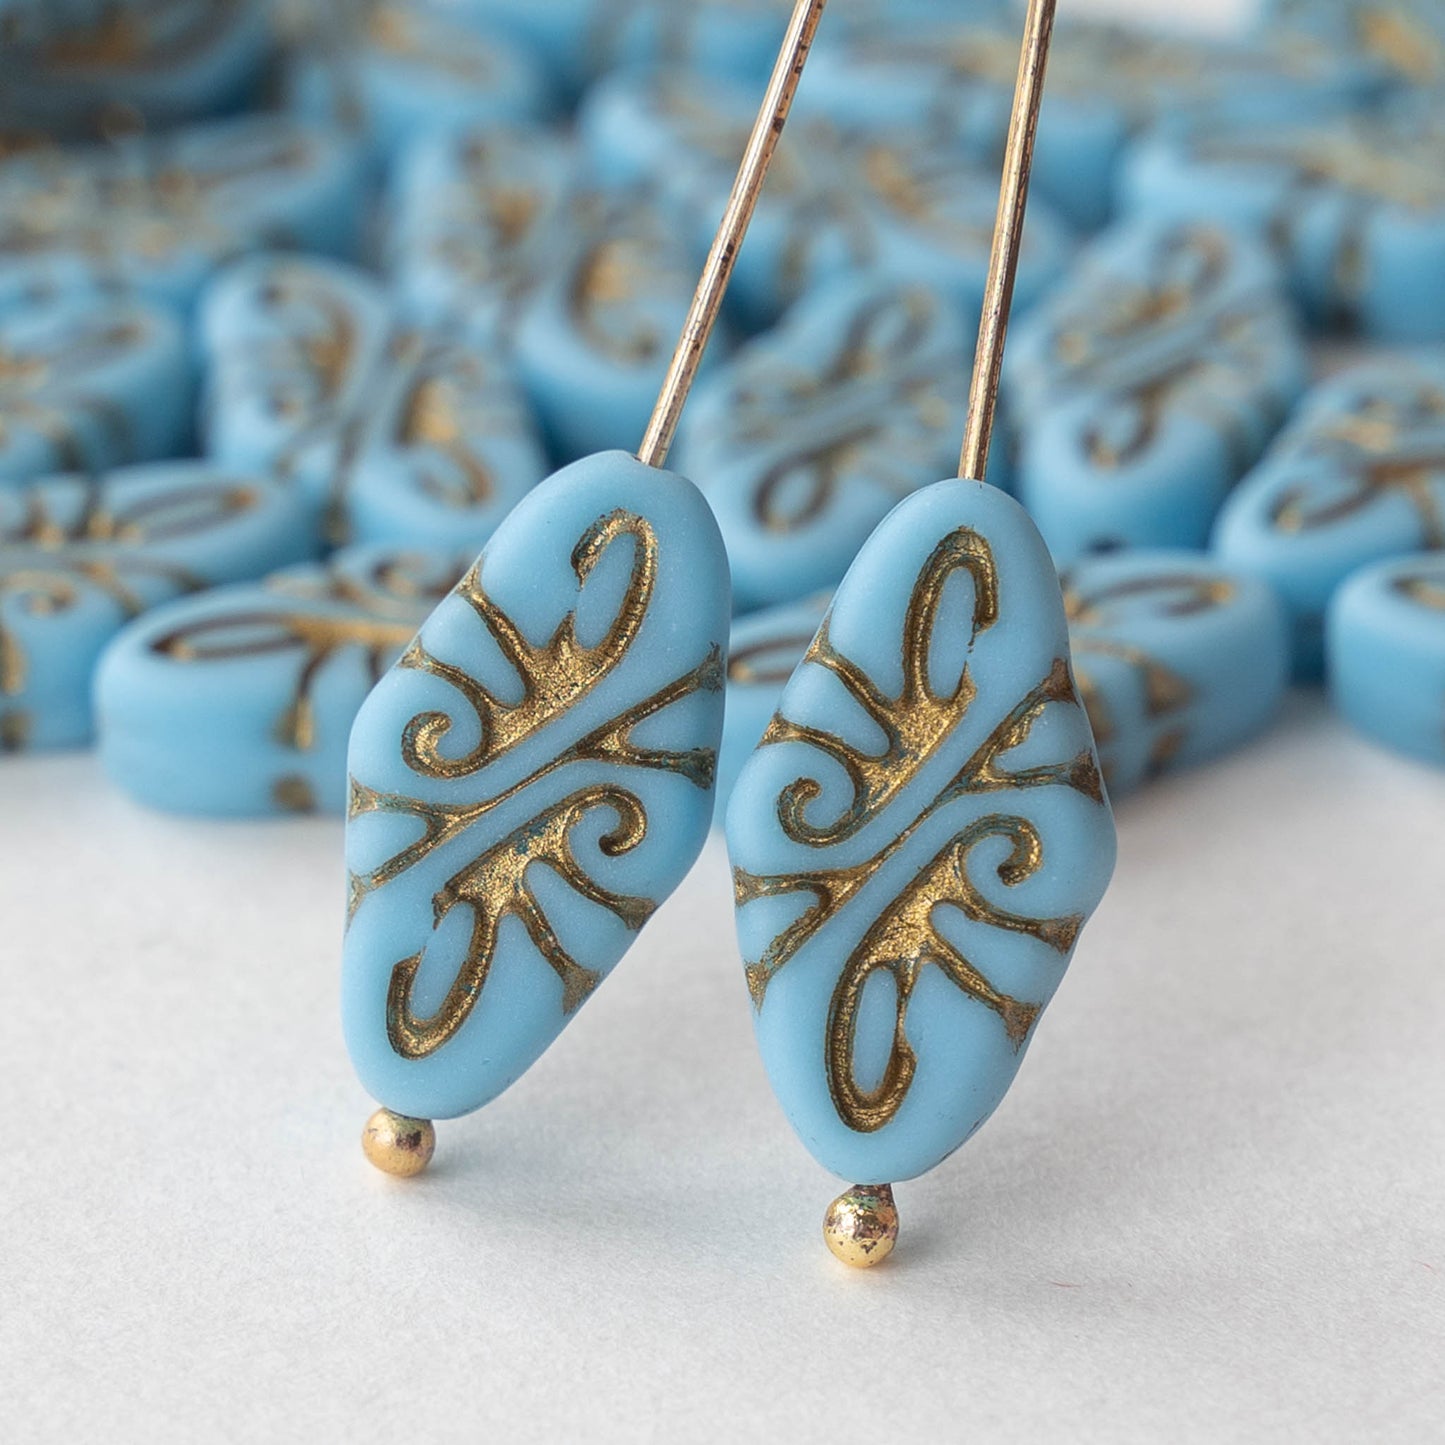 Oval Arabesque Beads - Blue Matte with Gold Wash - 10 beads